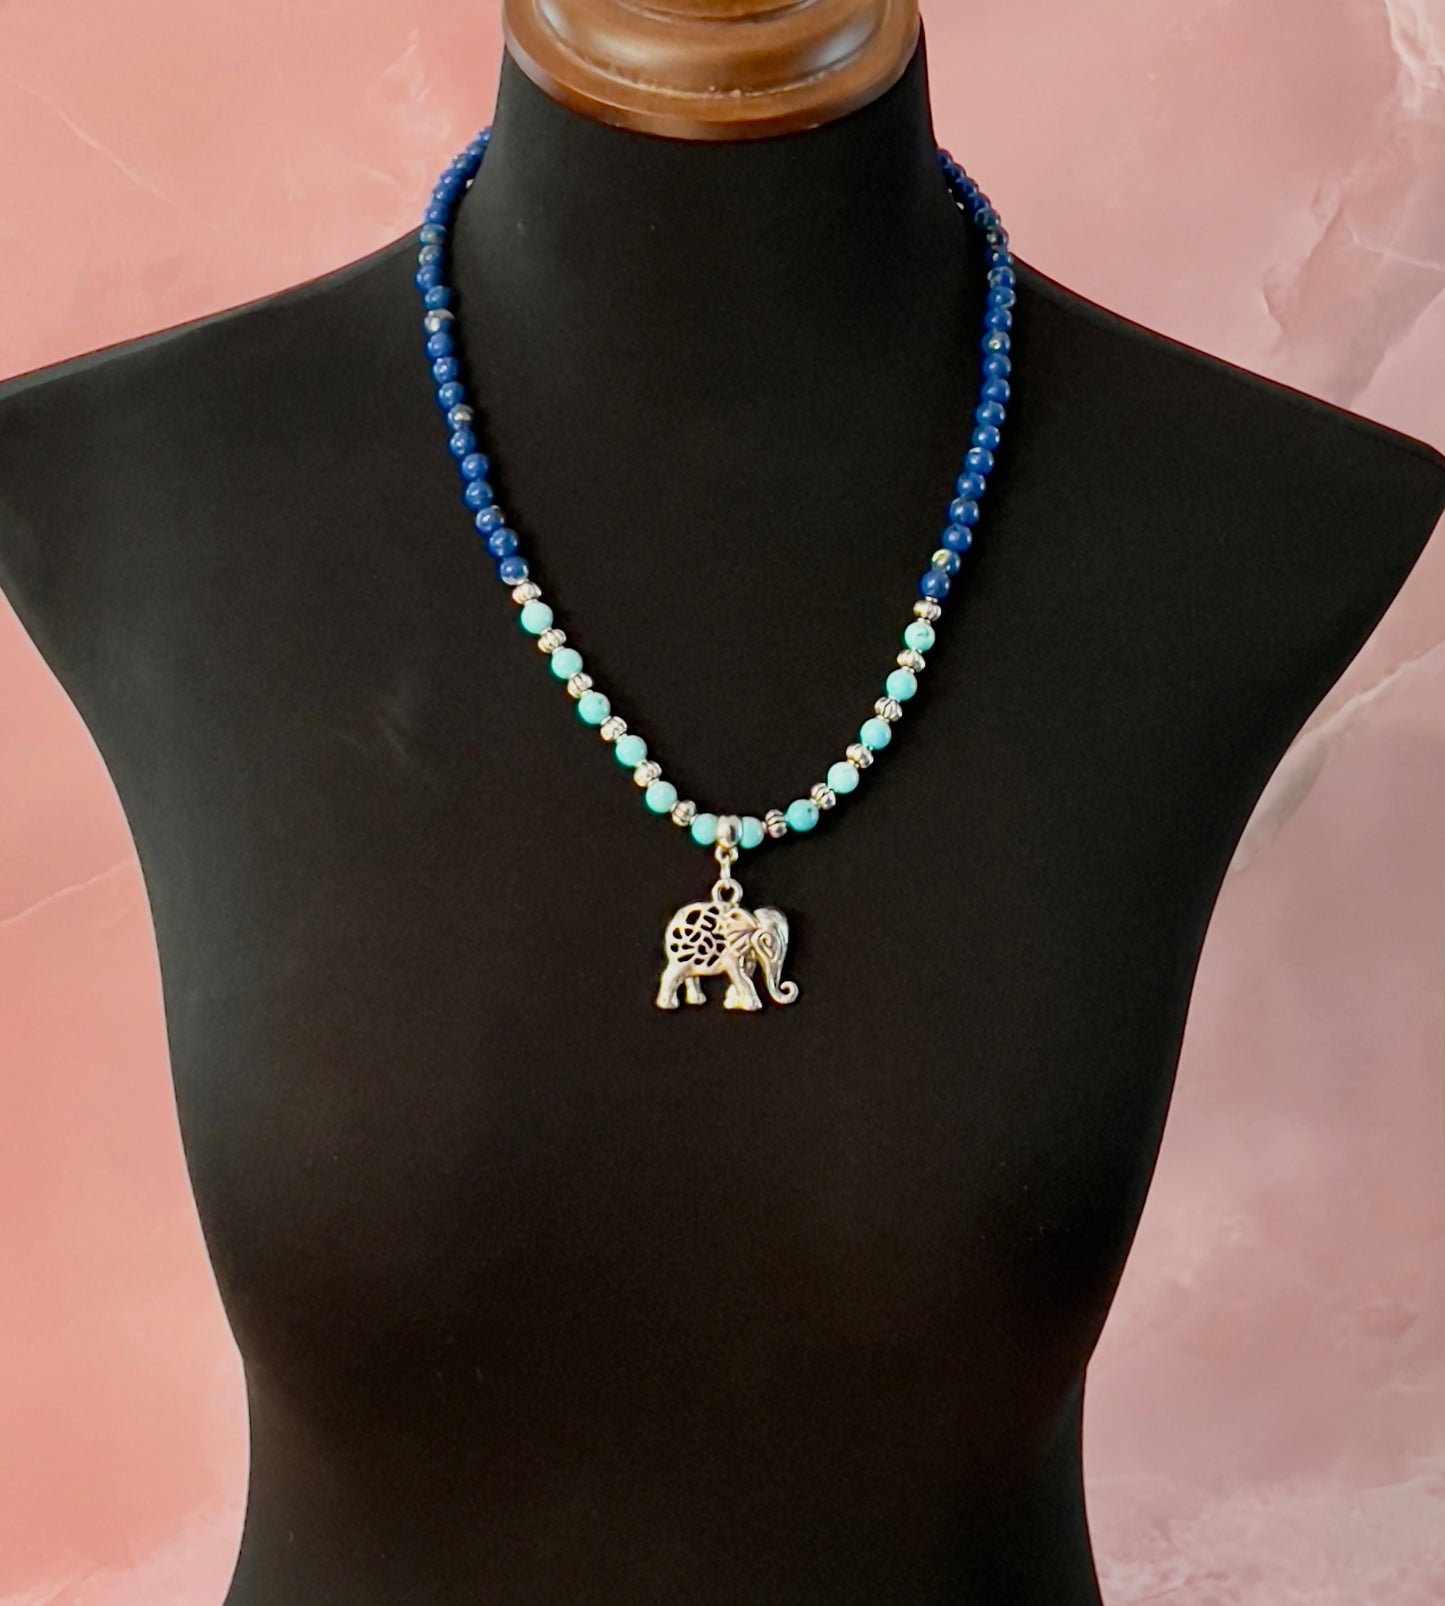 Turquoise and Sodalite Necklace with Indian Elephant